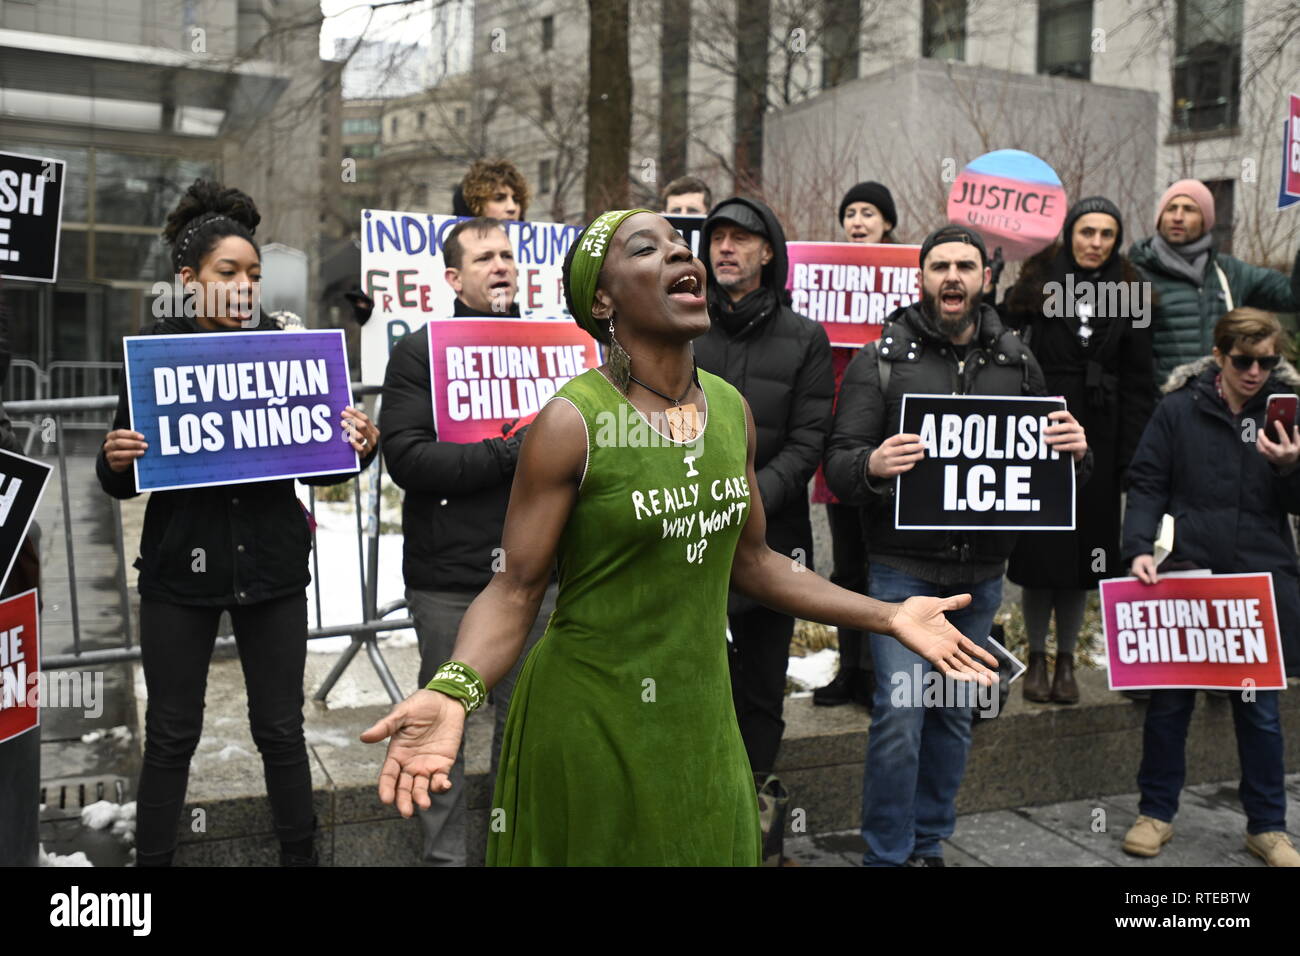 New York, NY, USA. 1 March 2019 New York US Statue of Liberty climber Patricia Okoumou walks into federal court for a hearing on whether her bail will be revoked after she was arrested for climbing a school for immigrant children in Austin, Texas, in another act of civil disobedience to protest against Trump administration immigration policies. Okoumou told supporters she would go on a hunger struck if she is jailed. Credit: Joseph Reid/Alamy Live News Credit: Joseph Reid/Alamy Live News Stock Photo